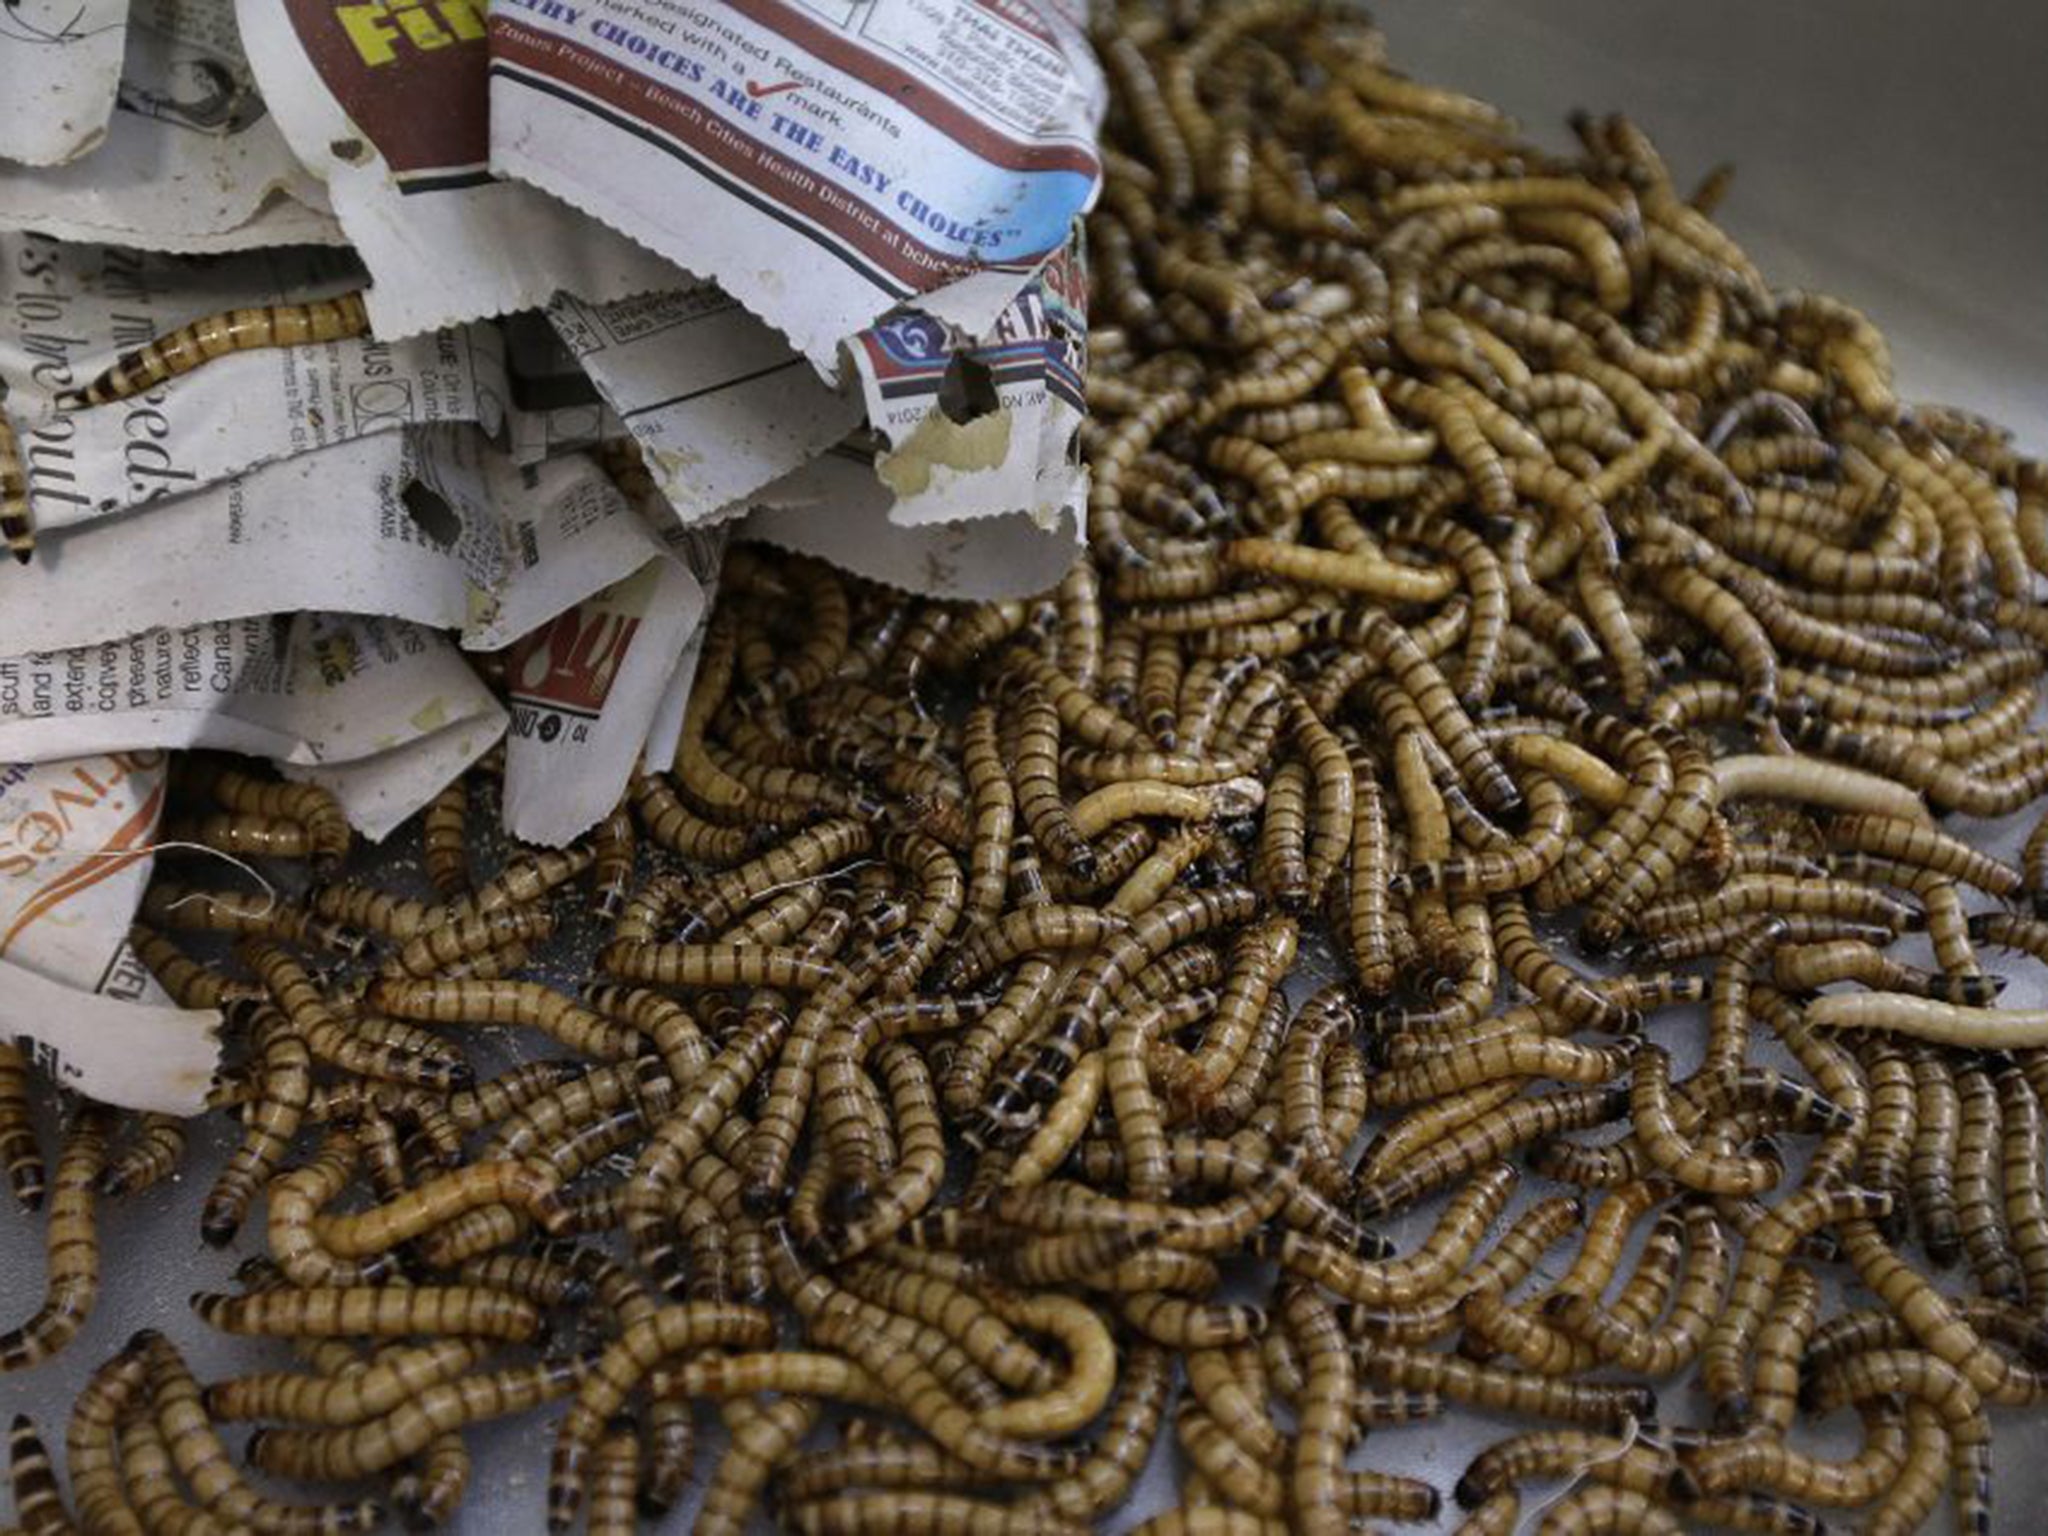 A growing number of "entopreneurs" face a tough job convincing people that crickets, meal worms, pictured, and caterpillars can be tasty treats